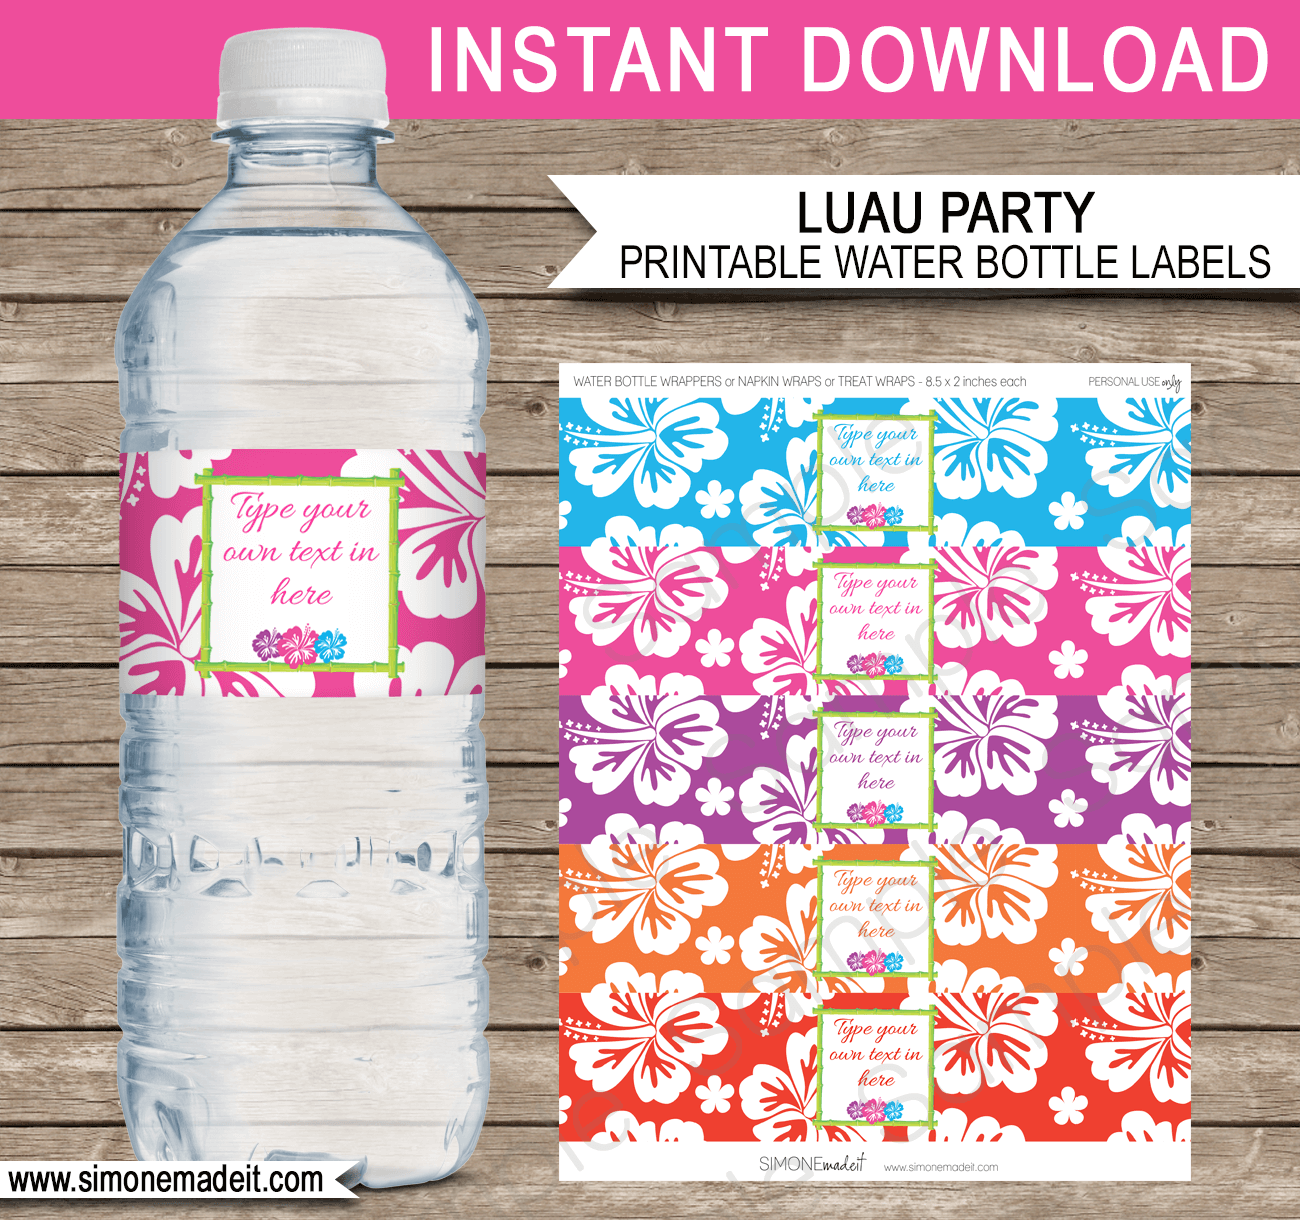 Printable Luau Party Water Bottle Labels Template | Birthday Party Decorations | DIY Editable Text | $3.00 INSTANT DOWNLOAD via SIMONEmadeit.com